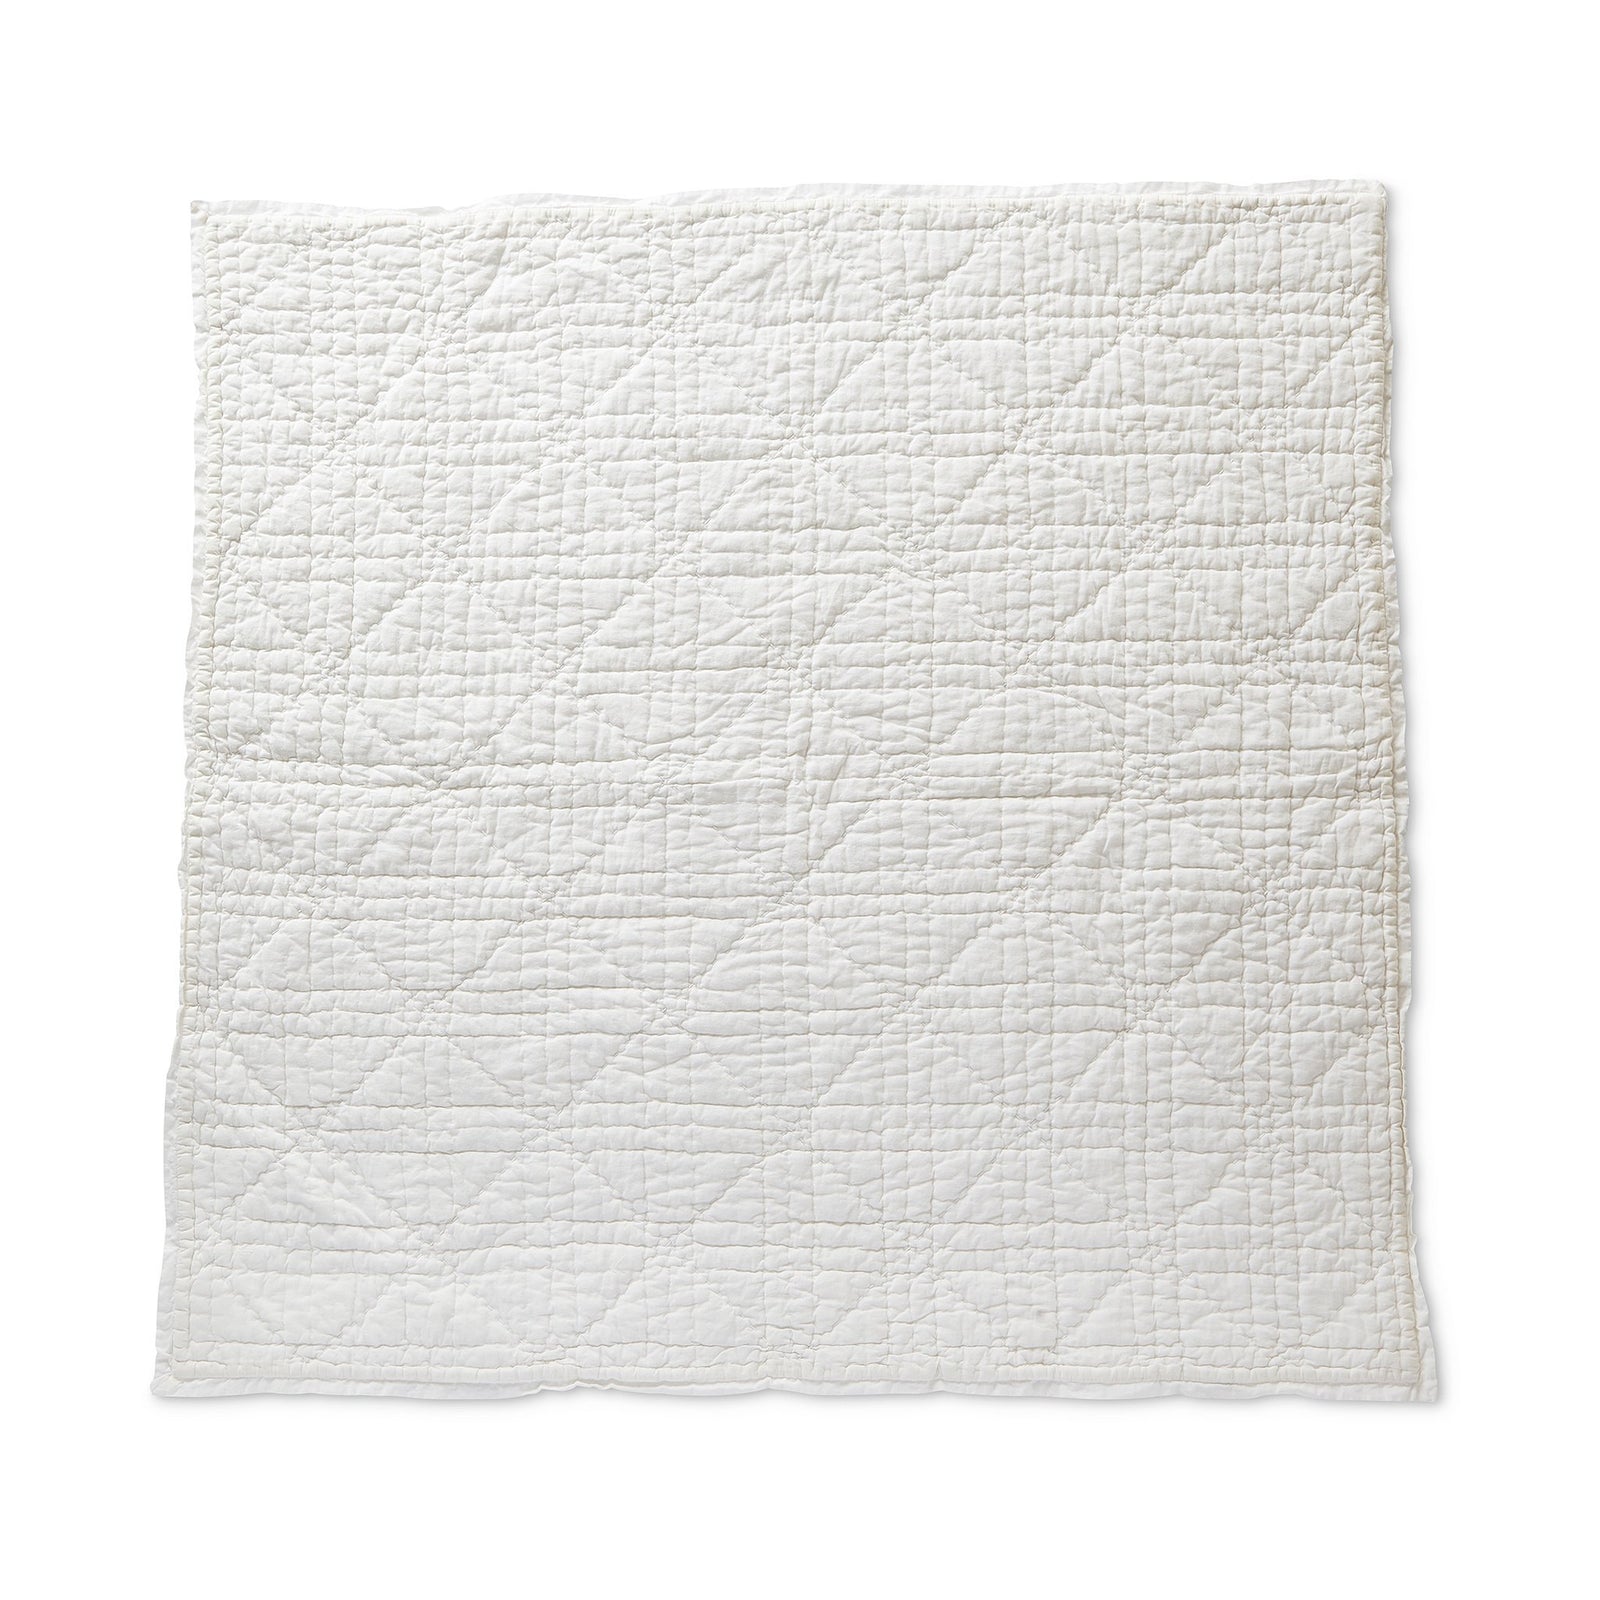 Reverse side of Pehr Bunny Hop Blanket. 100% cotton cambric exterior. Plain white.